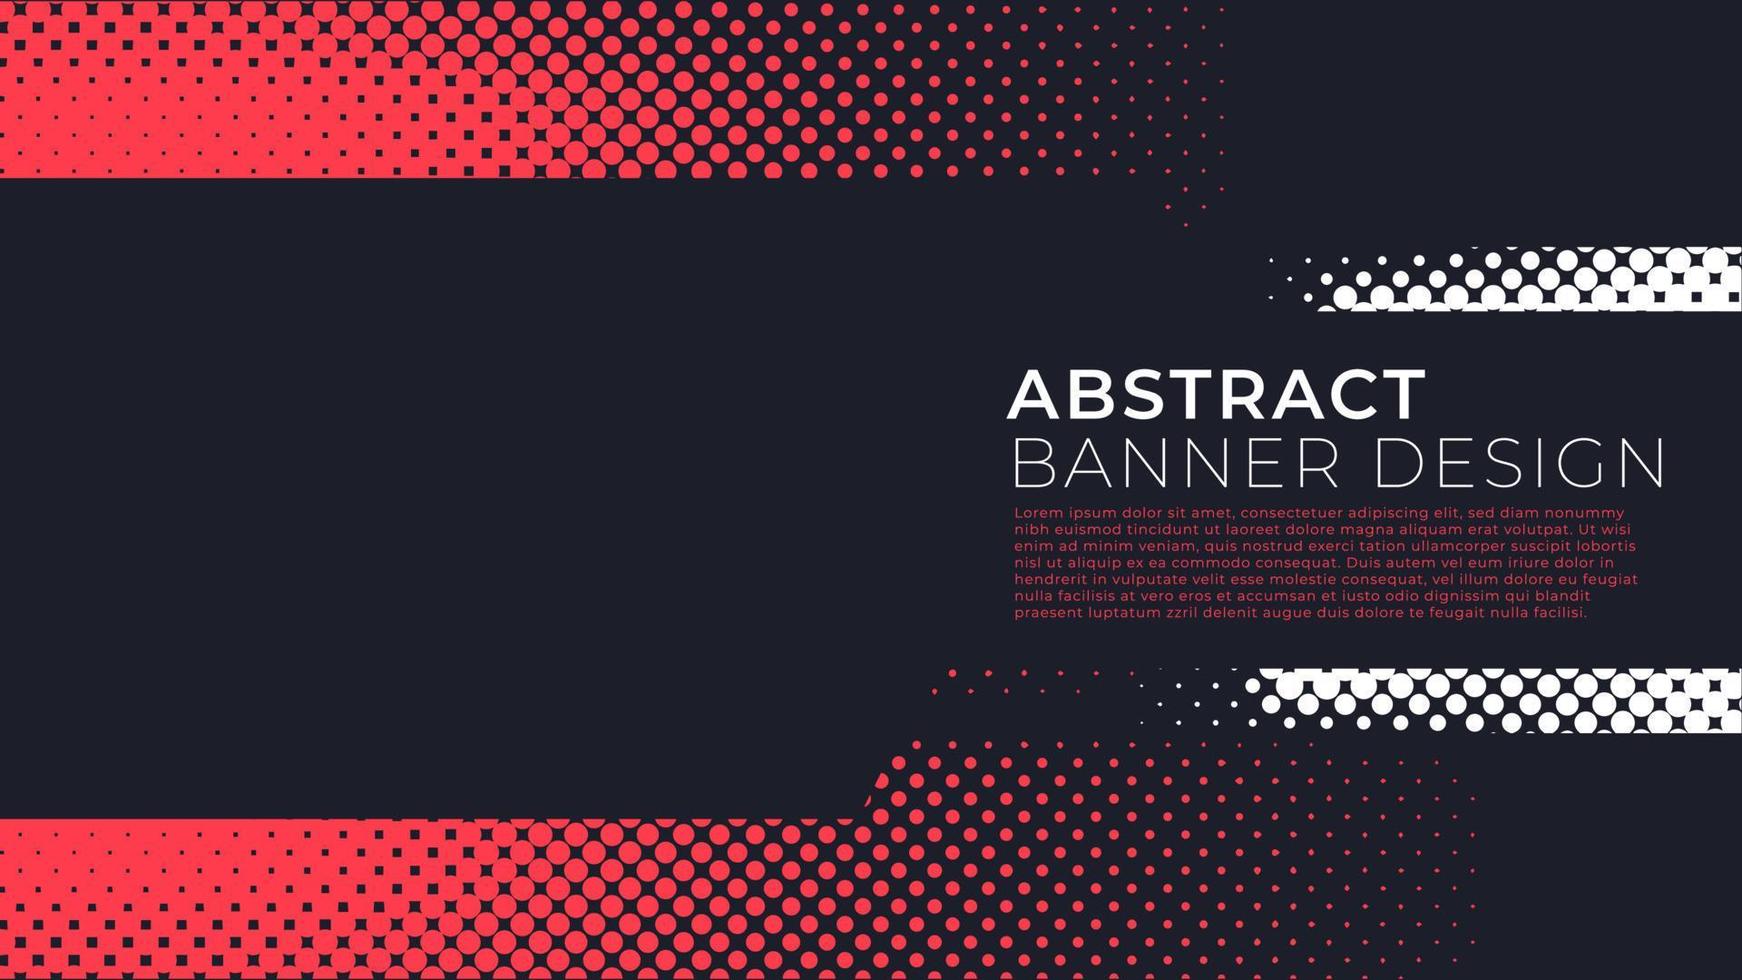 Halftone grunge banner design vector, concept of twotone background with photo frame and copy space for custom your content vector